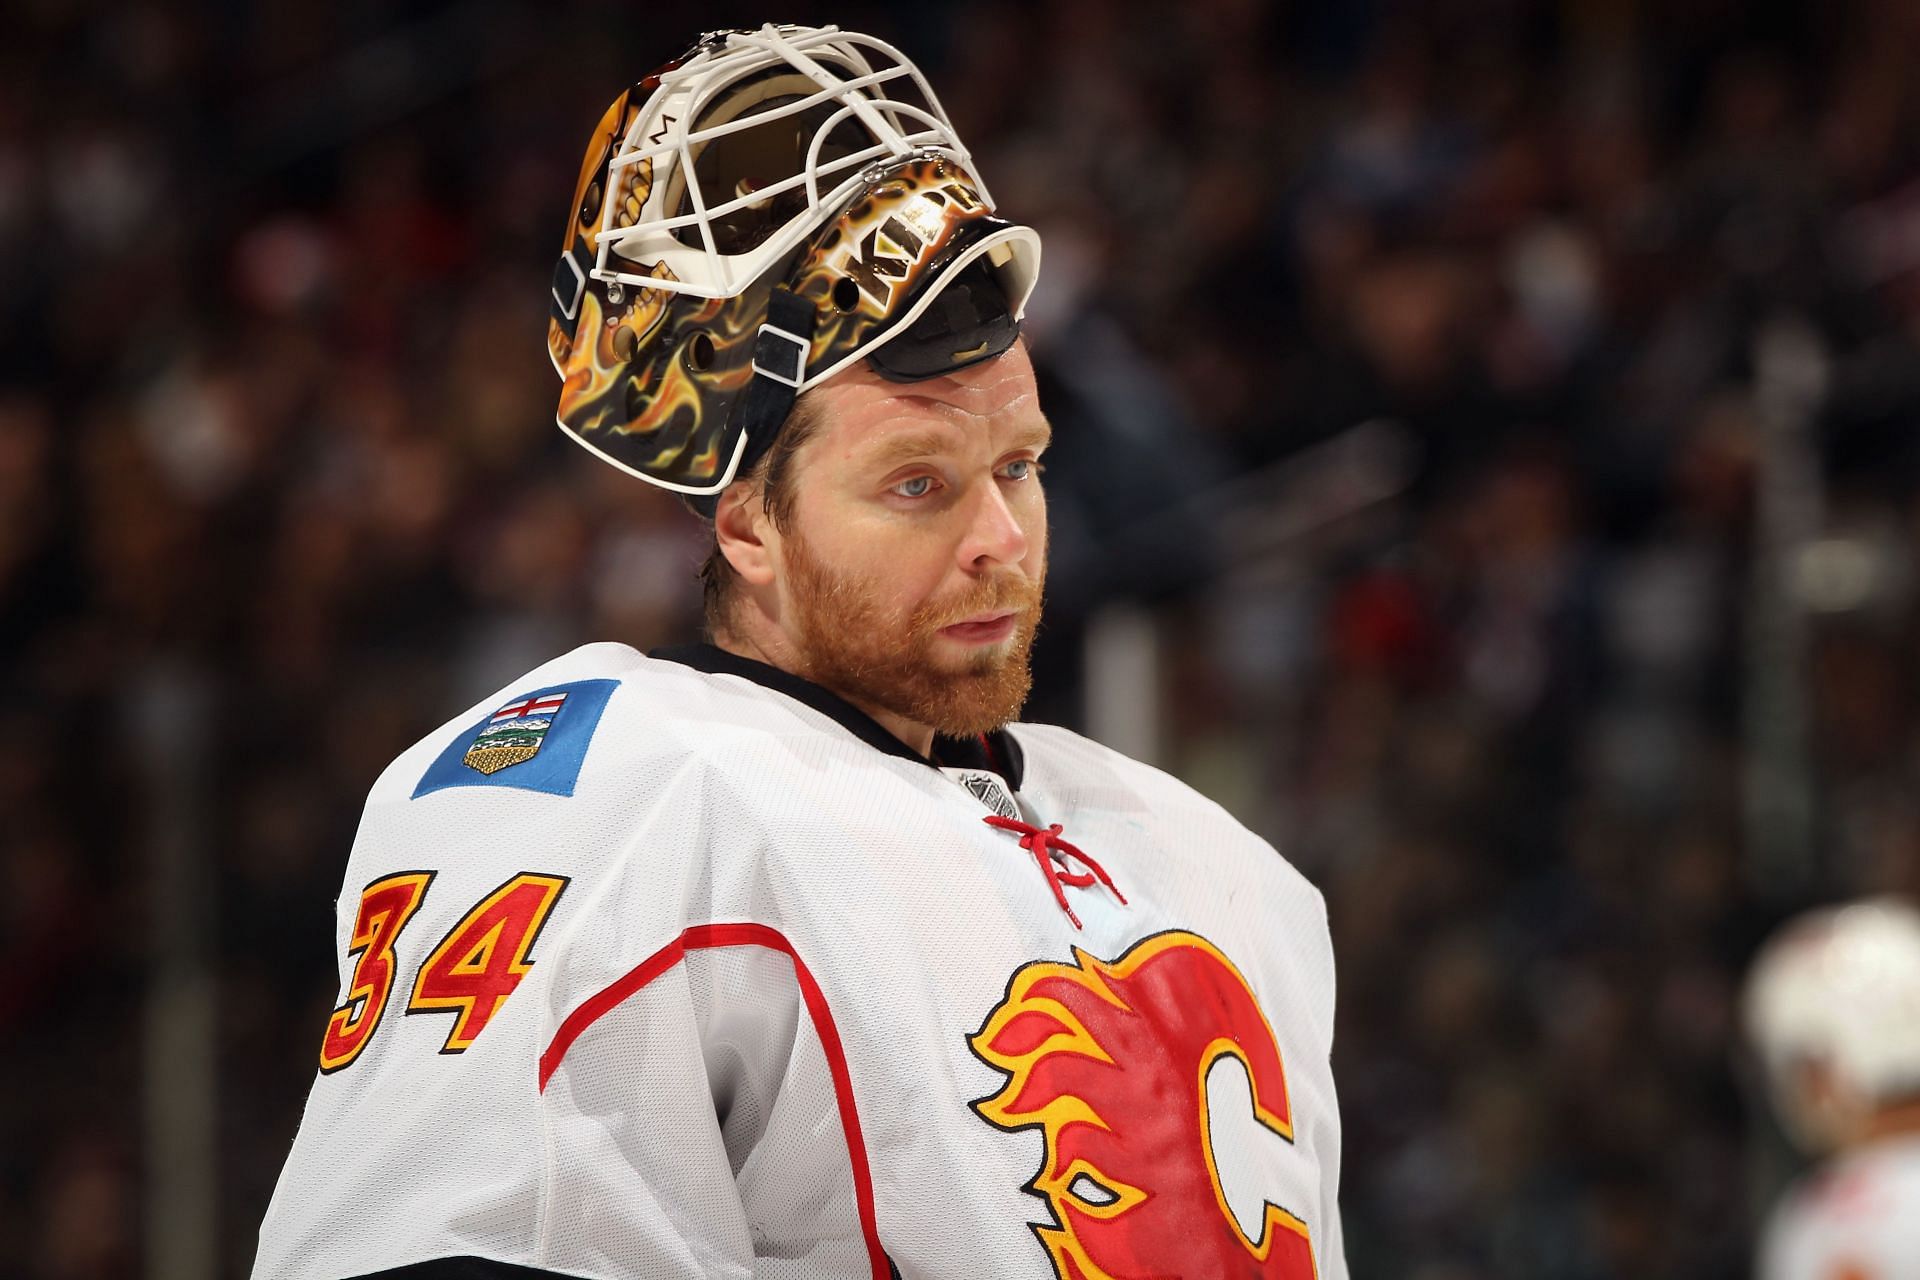 Miikka Kiprusoff will have his jersey up in the rafters on March 2, 20